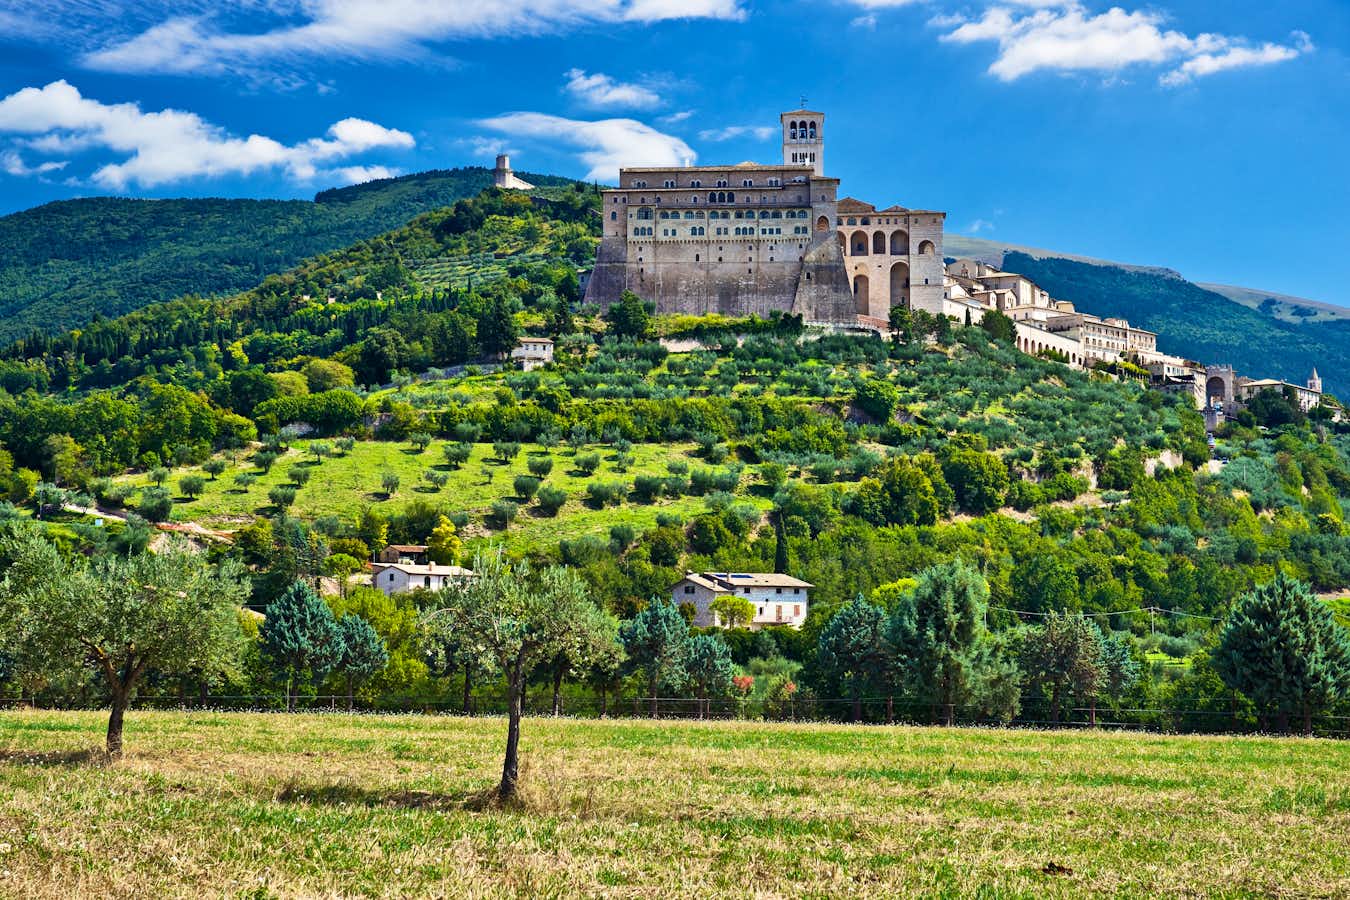 tourhub | Shearings | Green Heart of Italy for Solo Travellers by Express Coach 